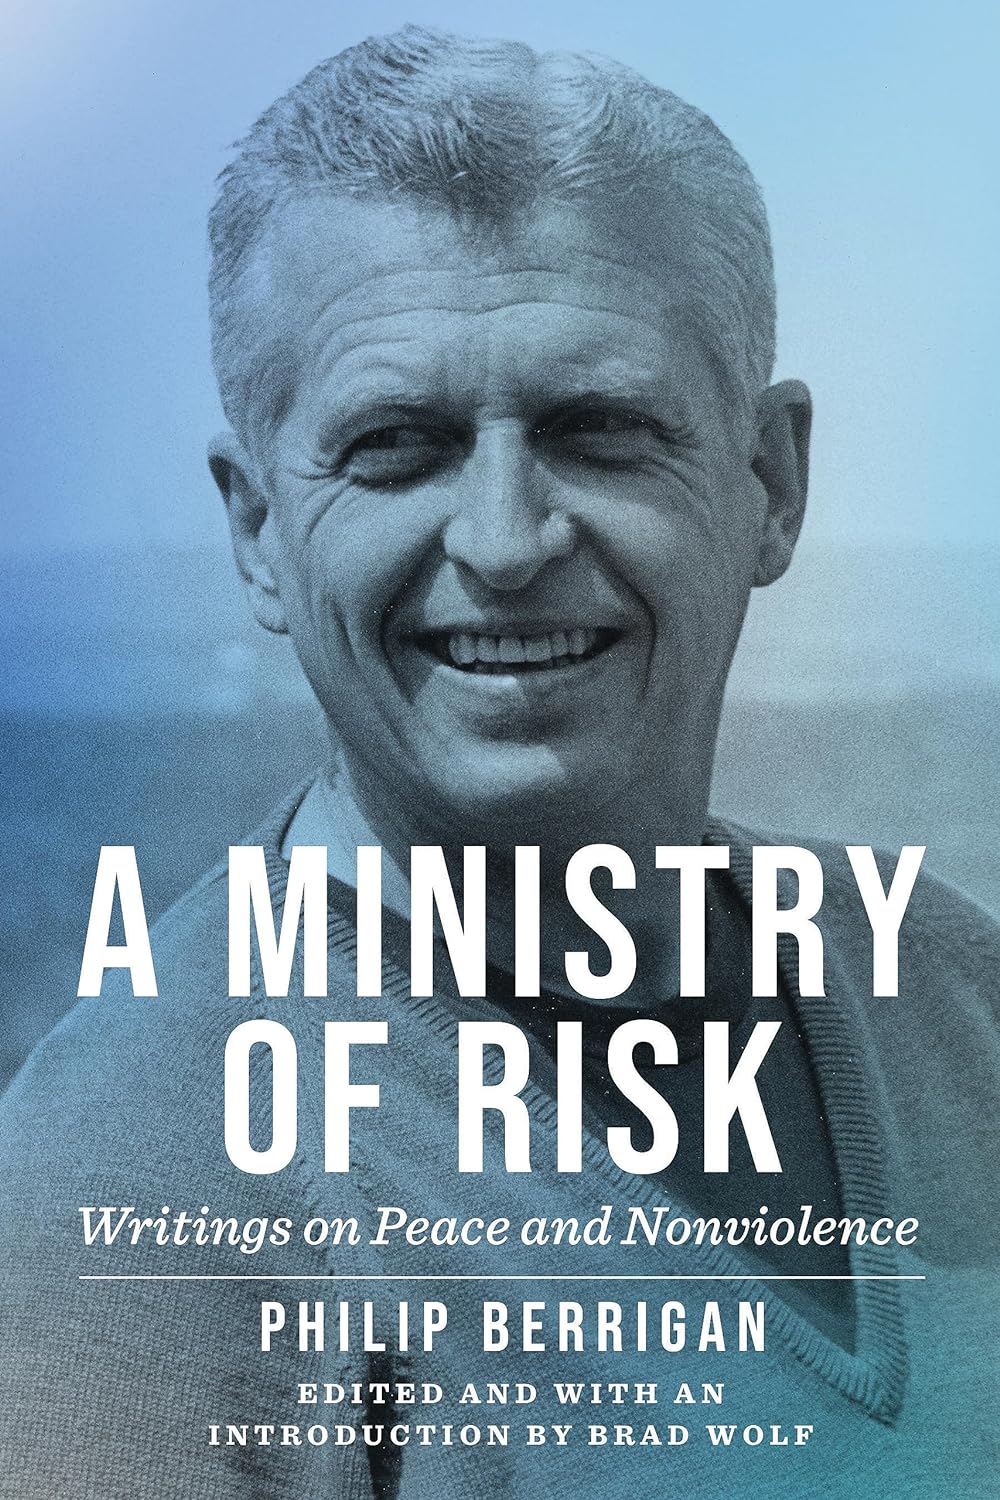 "A Ministry of Risk" book cover